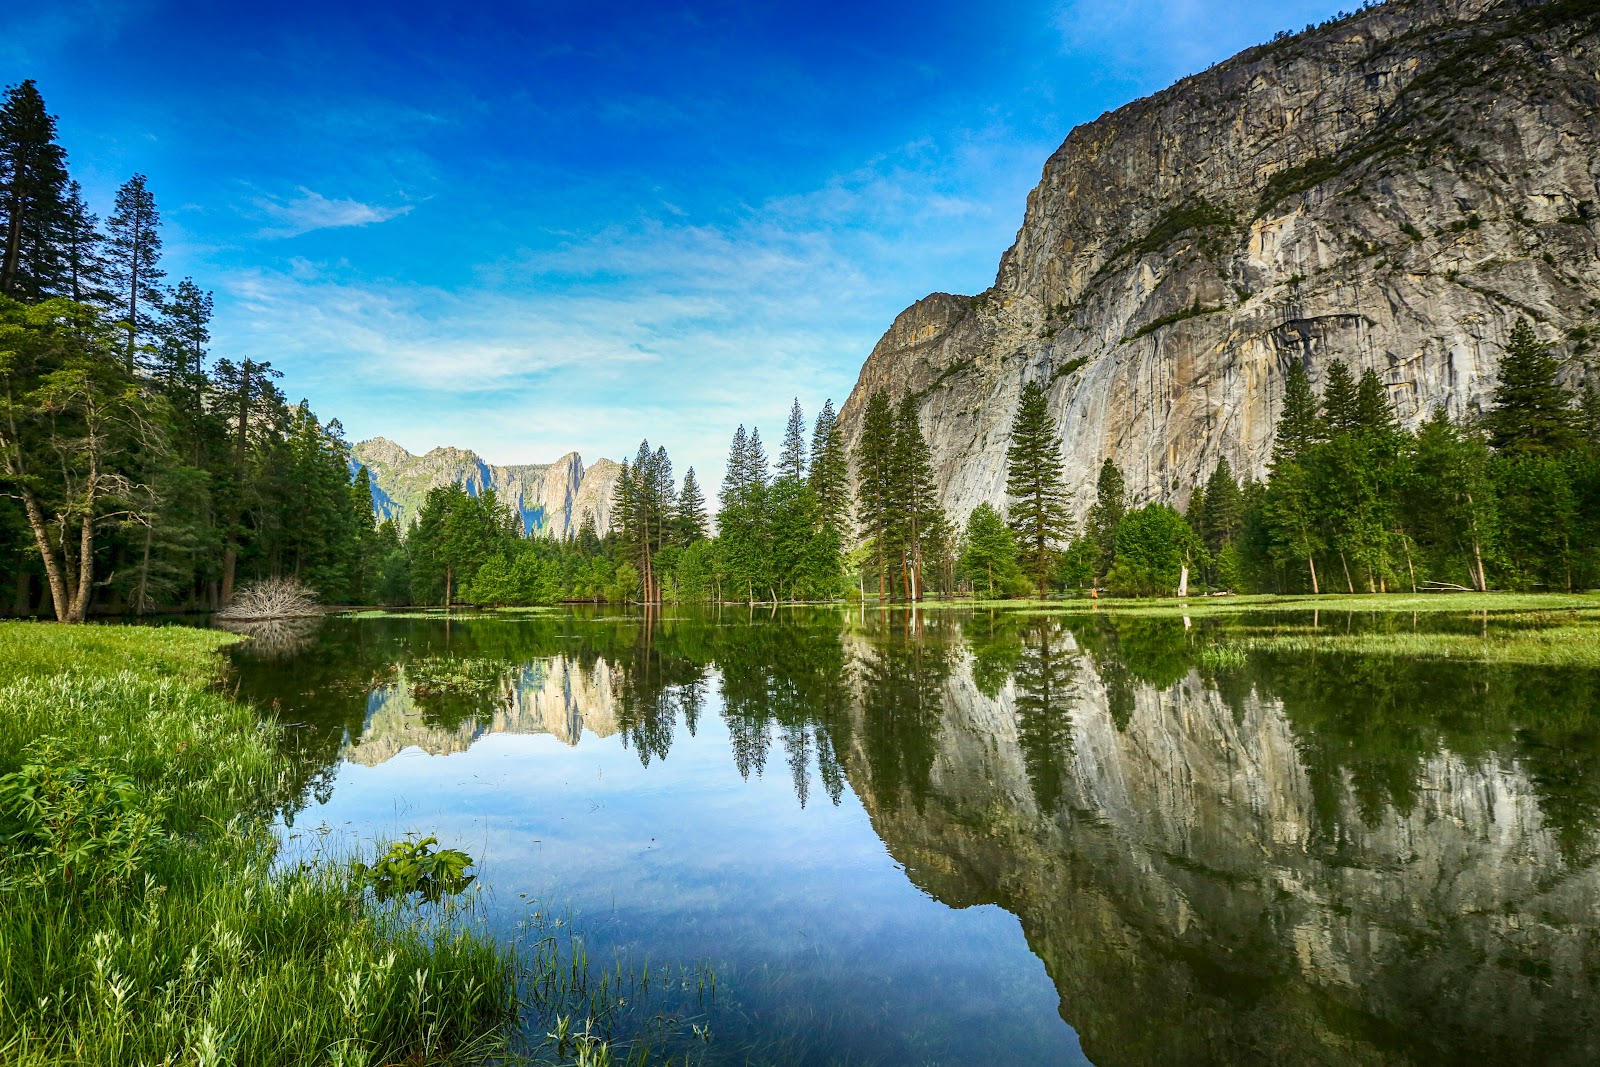 Yosemite in summer makes for iconic photo shots